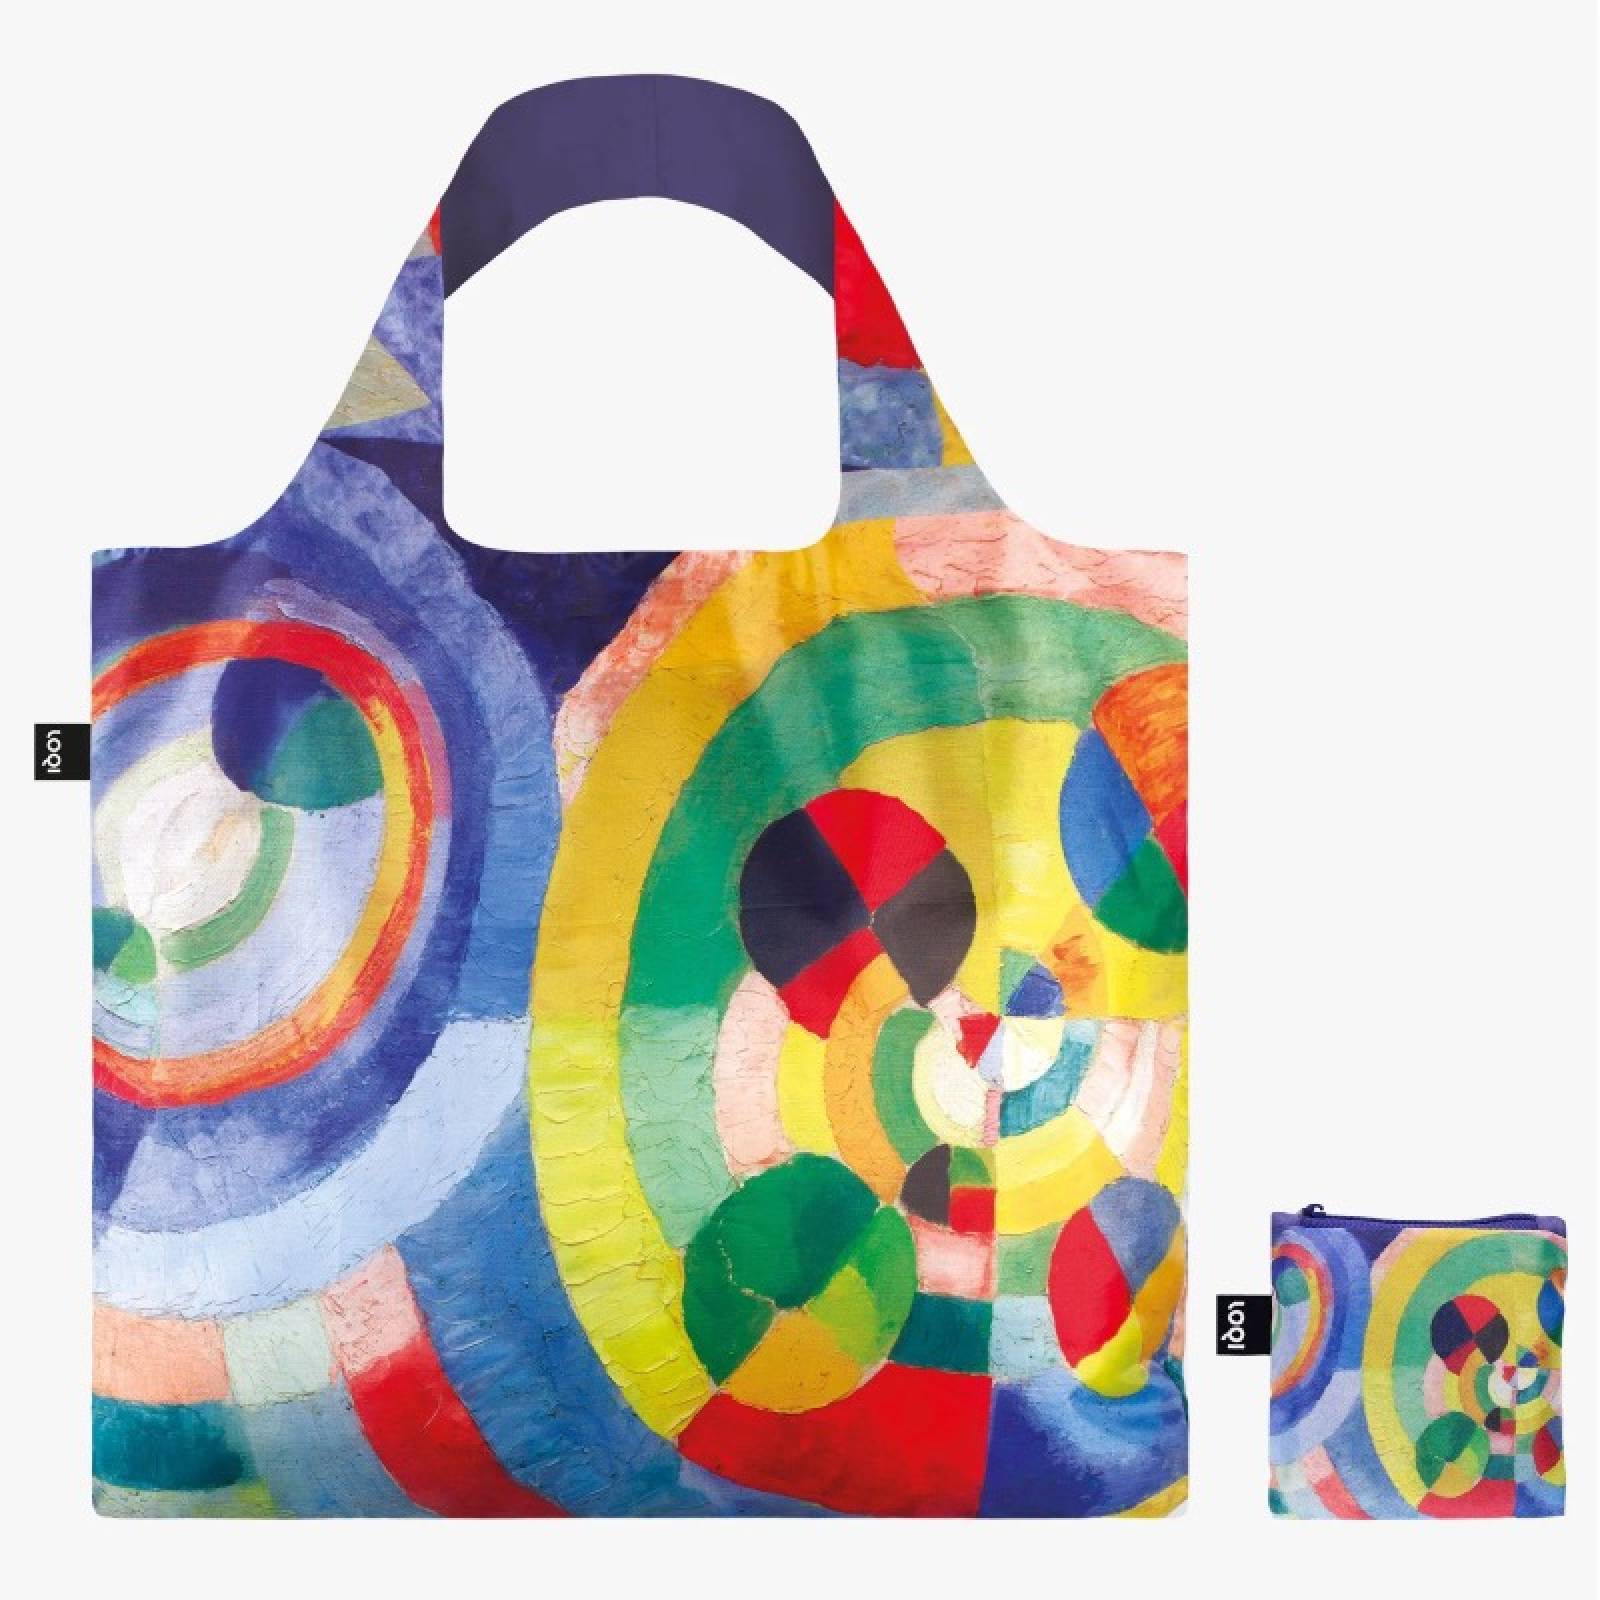 Robert Delauny Circular Forms - Eco Tote Bag With Pouch thumbnails